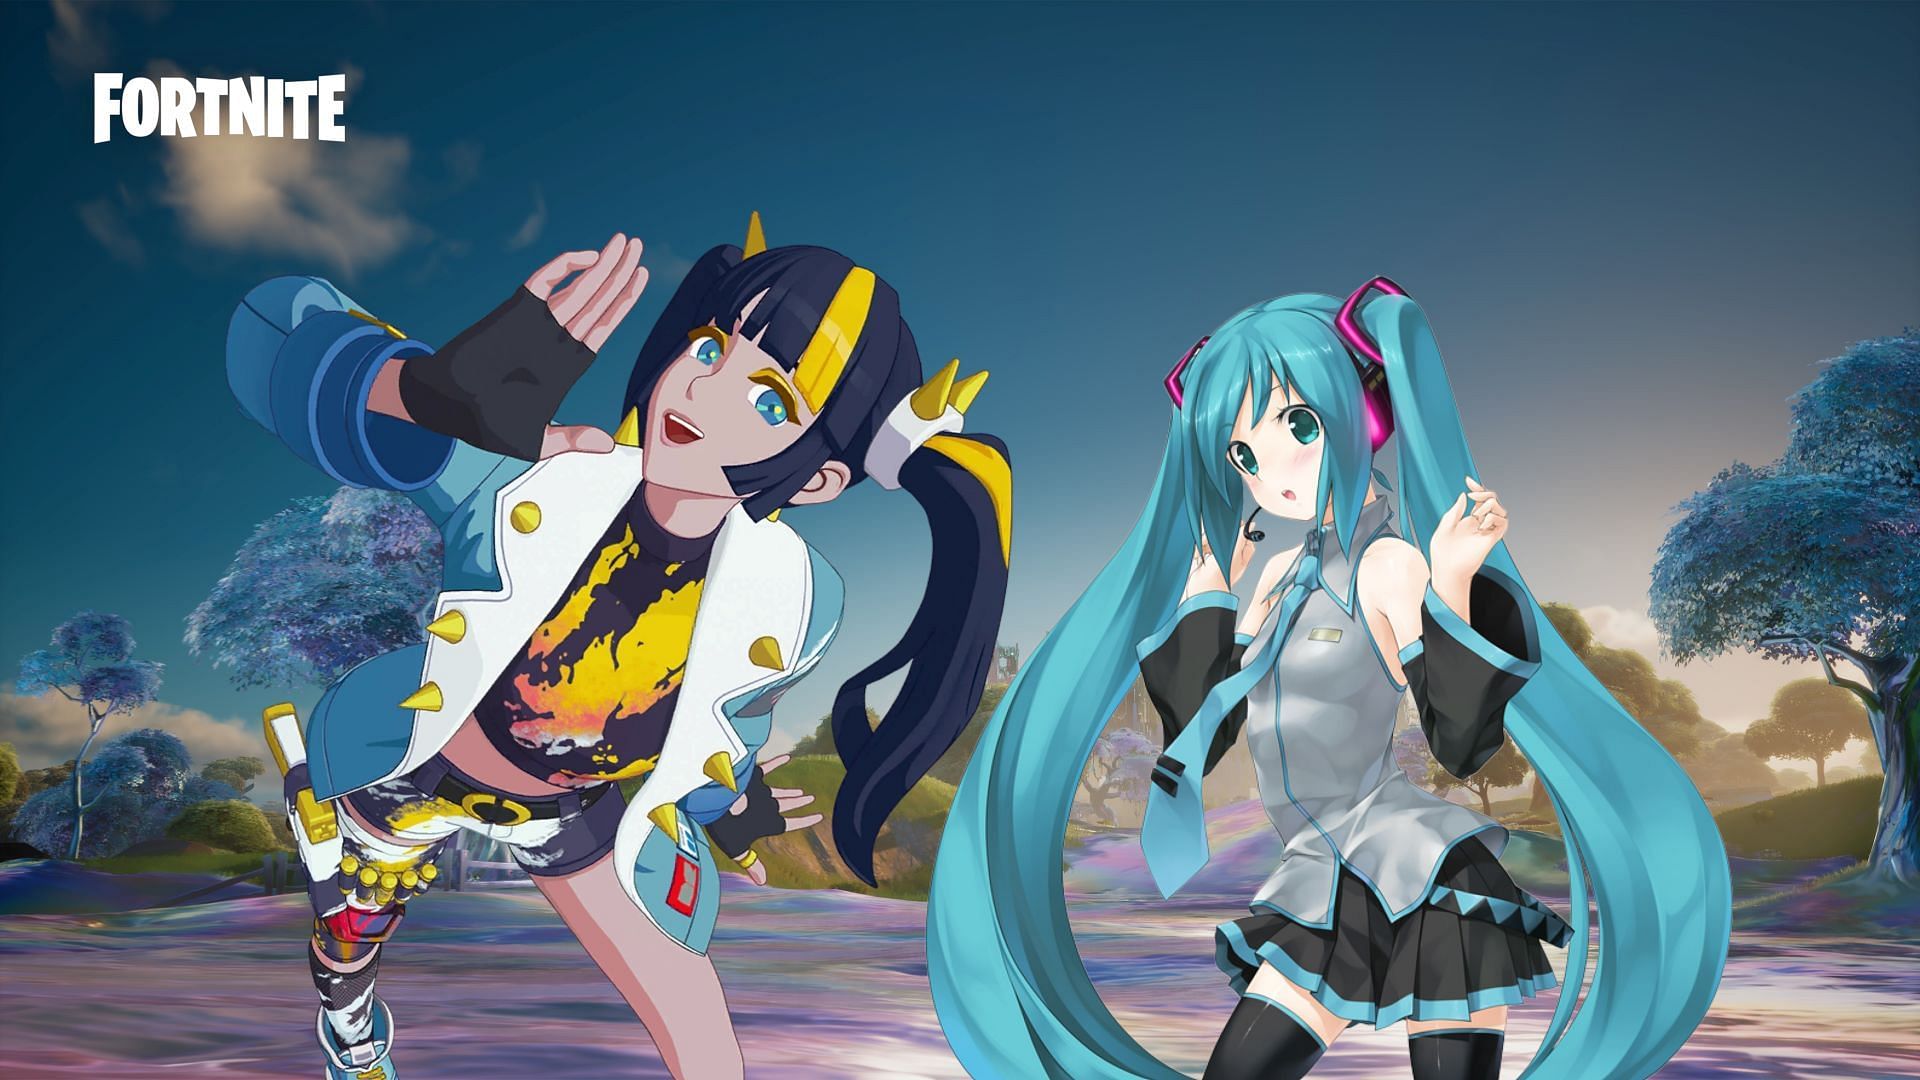 Although Lennox looks similar to Hatsune, there